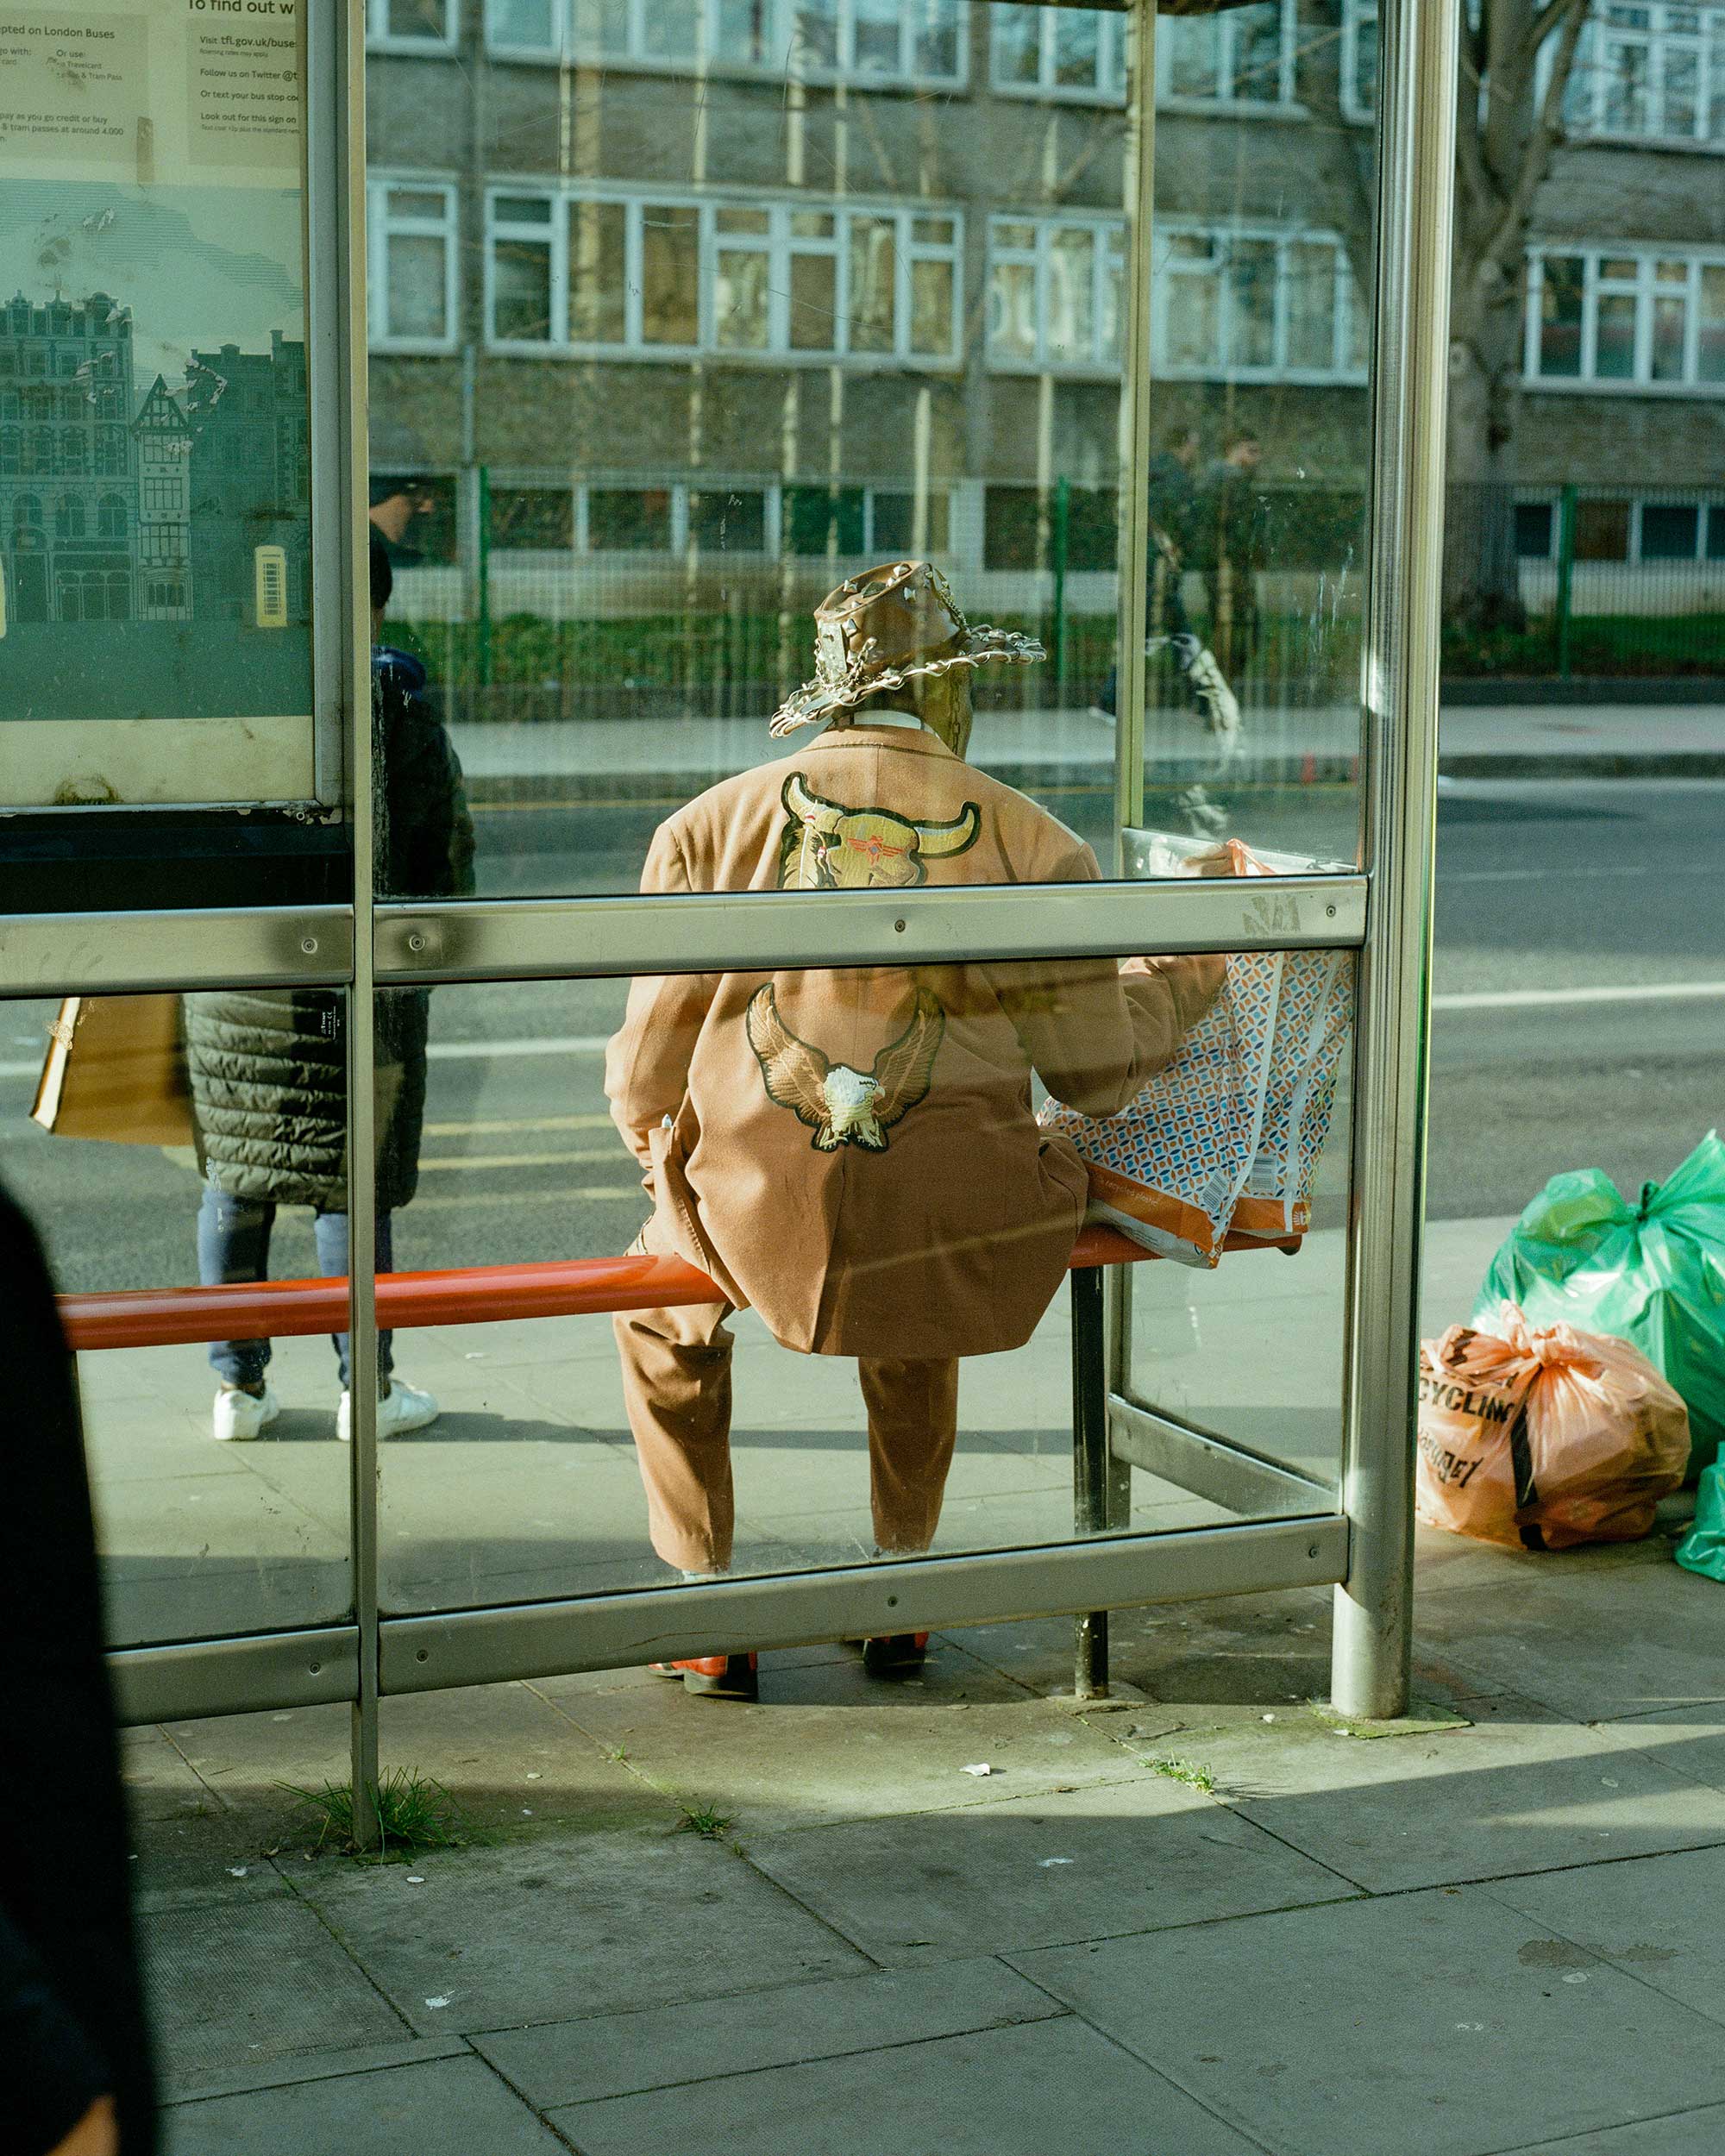 View of the back of a man sitting at a bus stop wearing a cowboy hat.